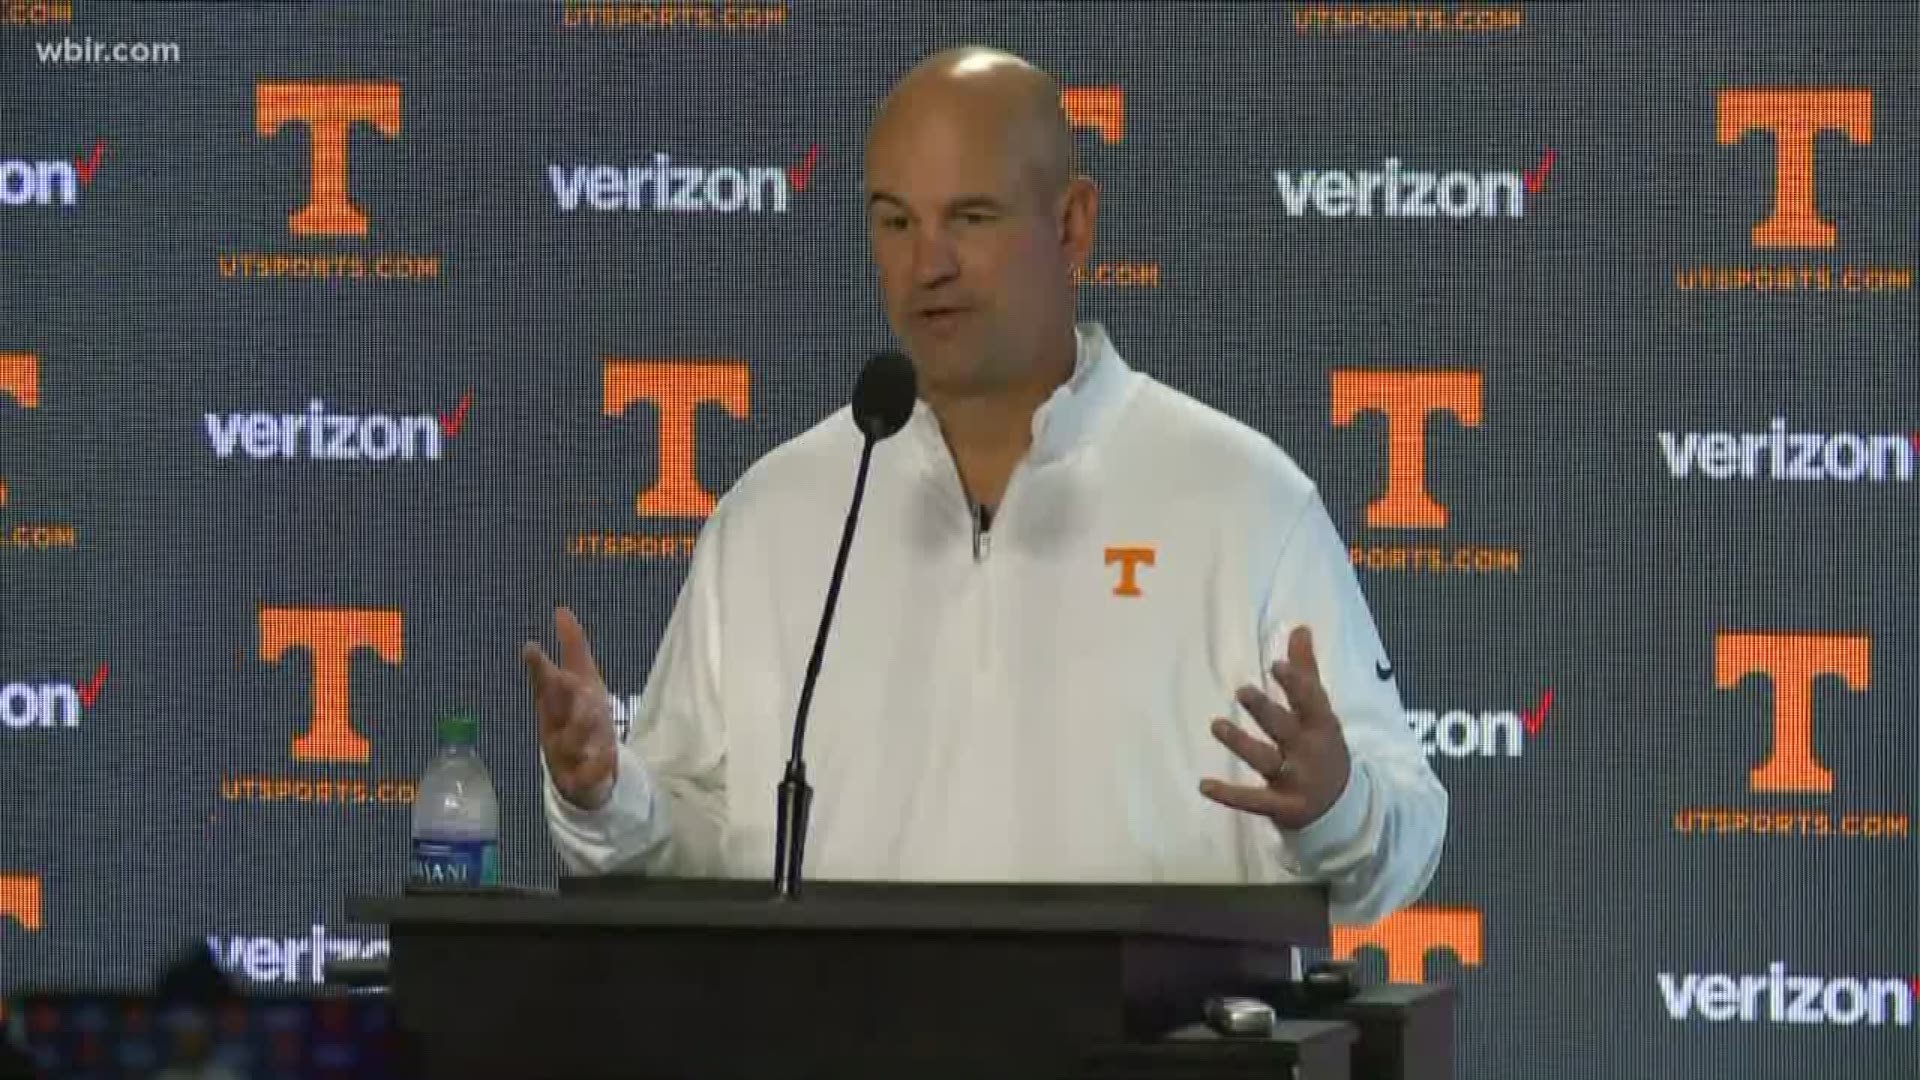 Coach Pruitt spoke to the media about the challenge ahead.